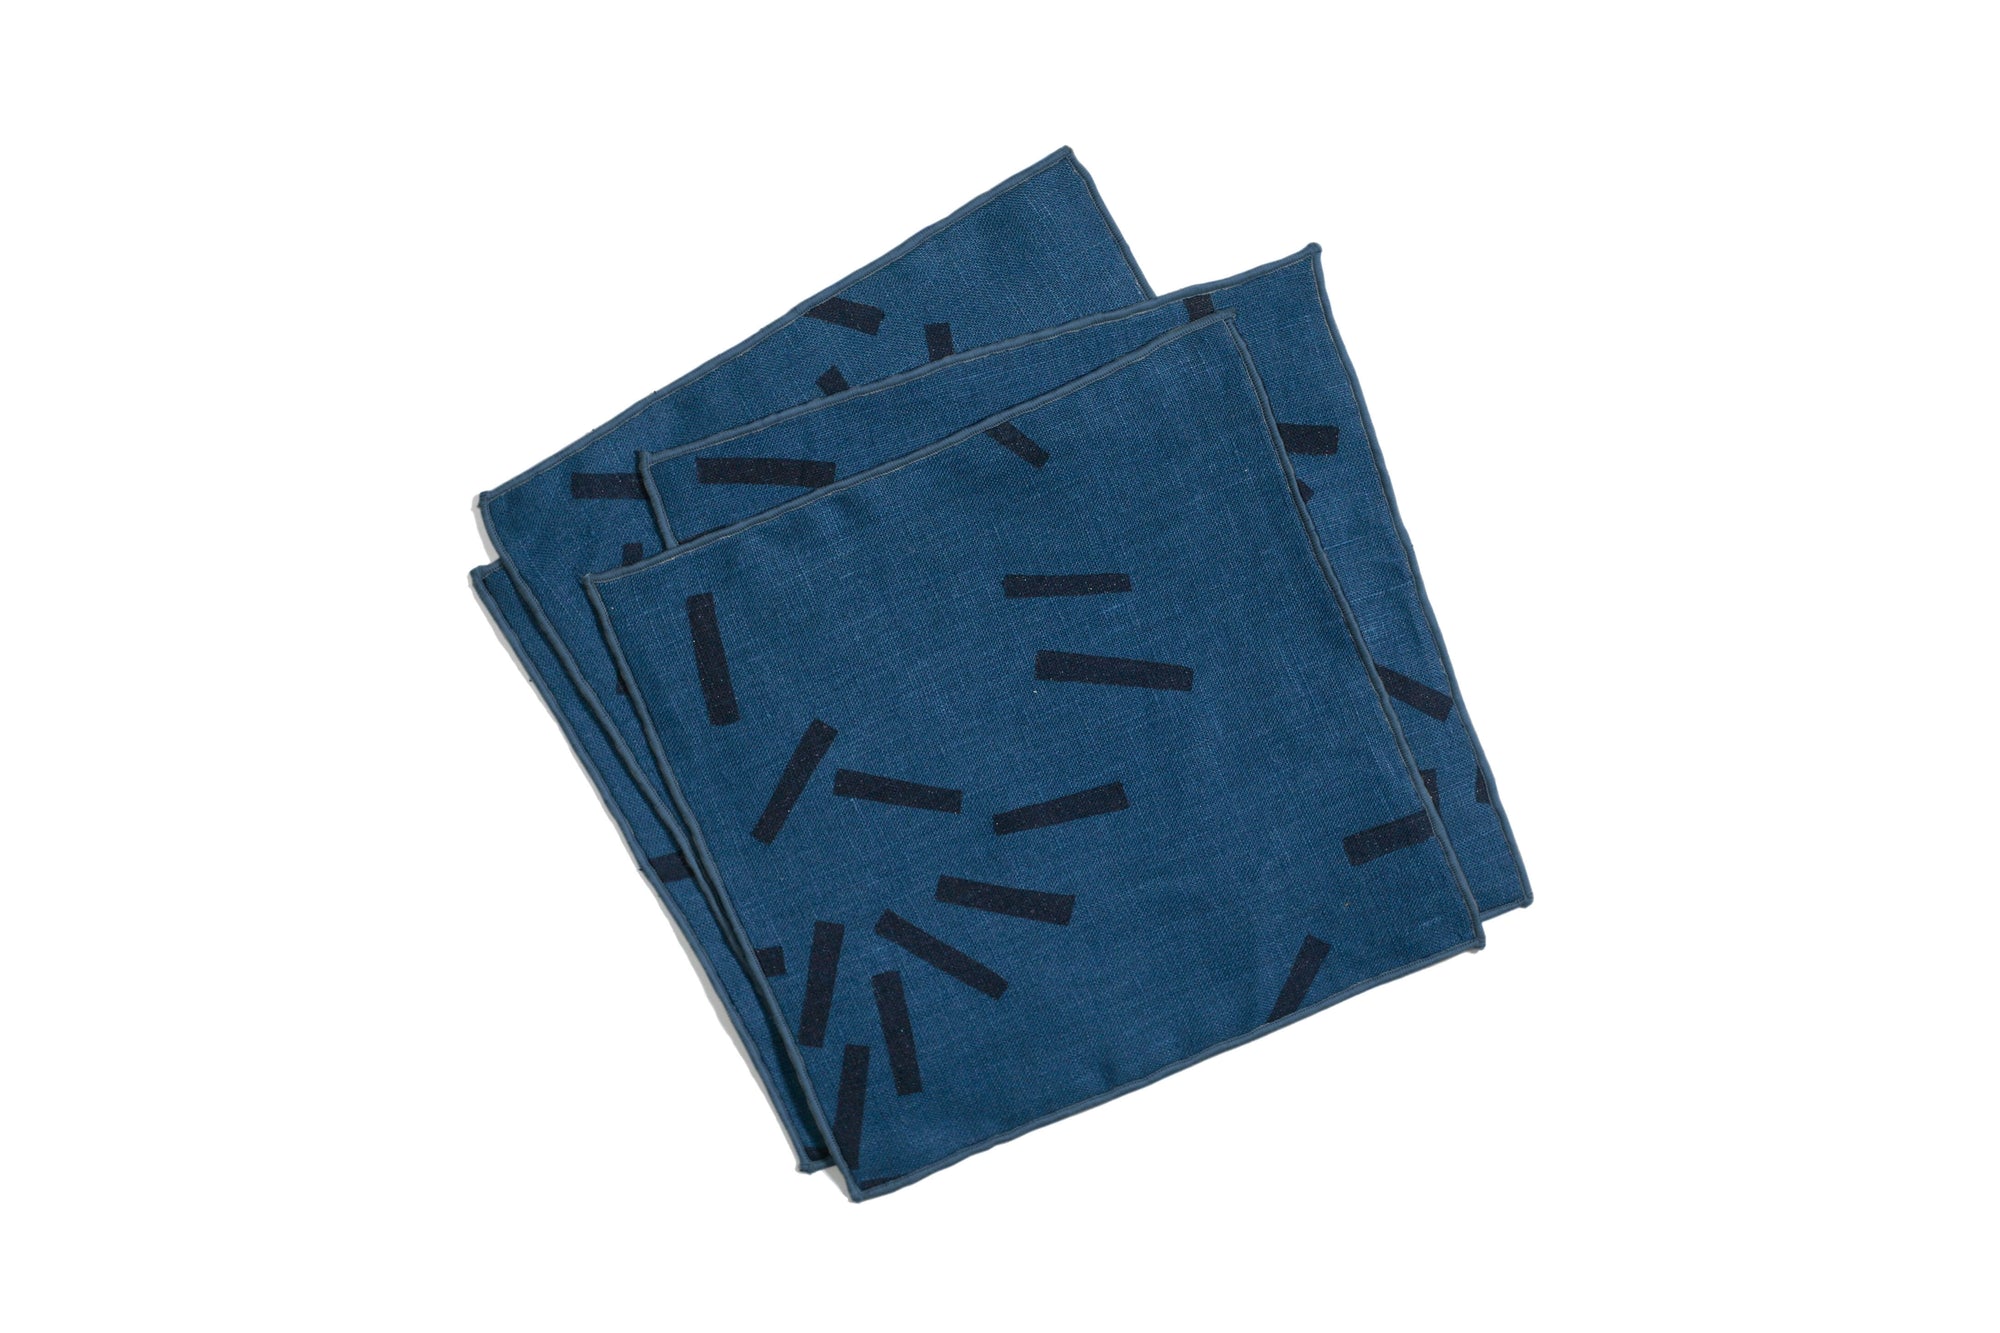 'Toss' Hand-Printed 100% Linen Cocktail Napkins in Blues, Set of 4